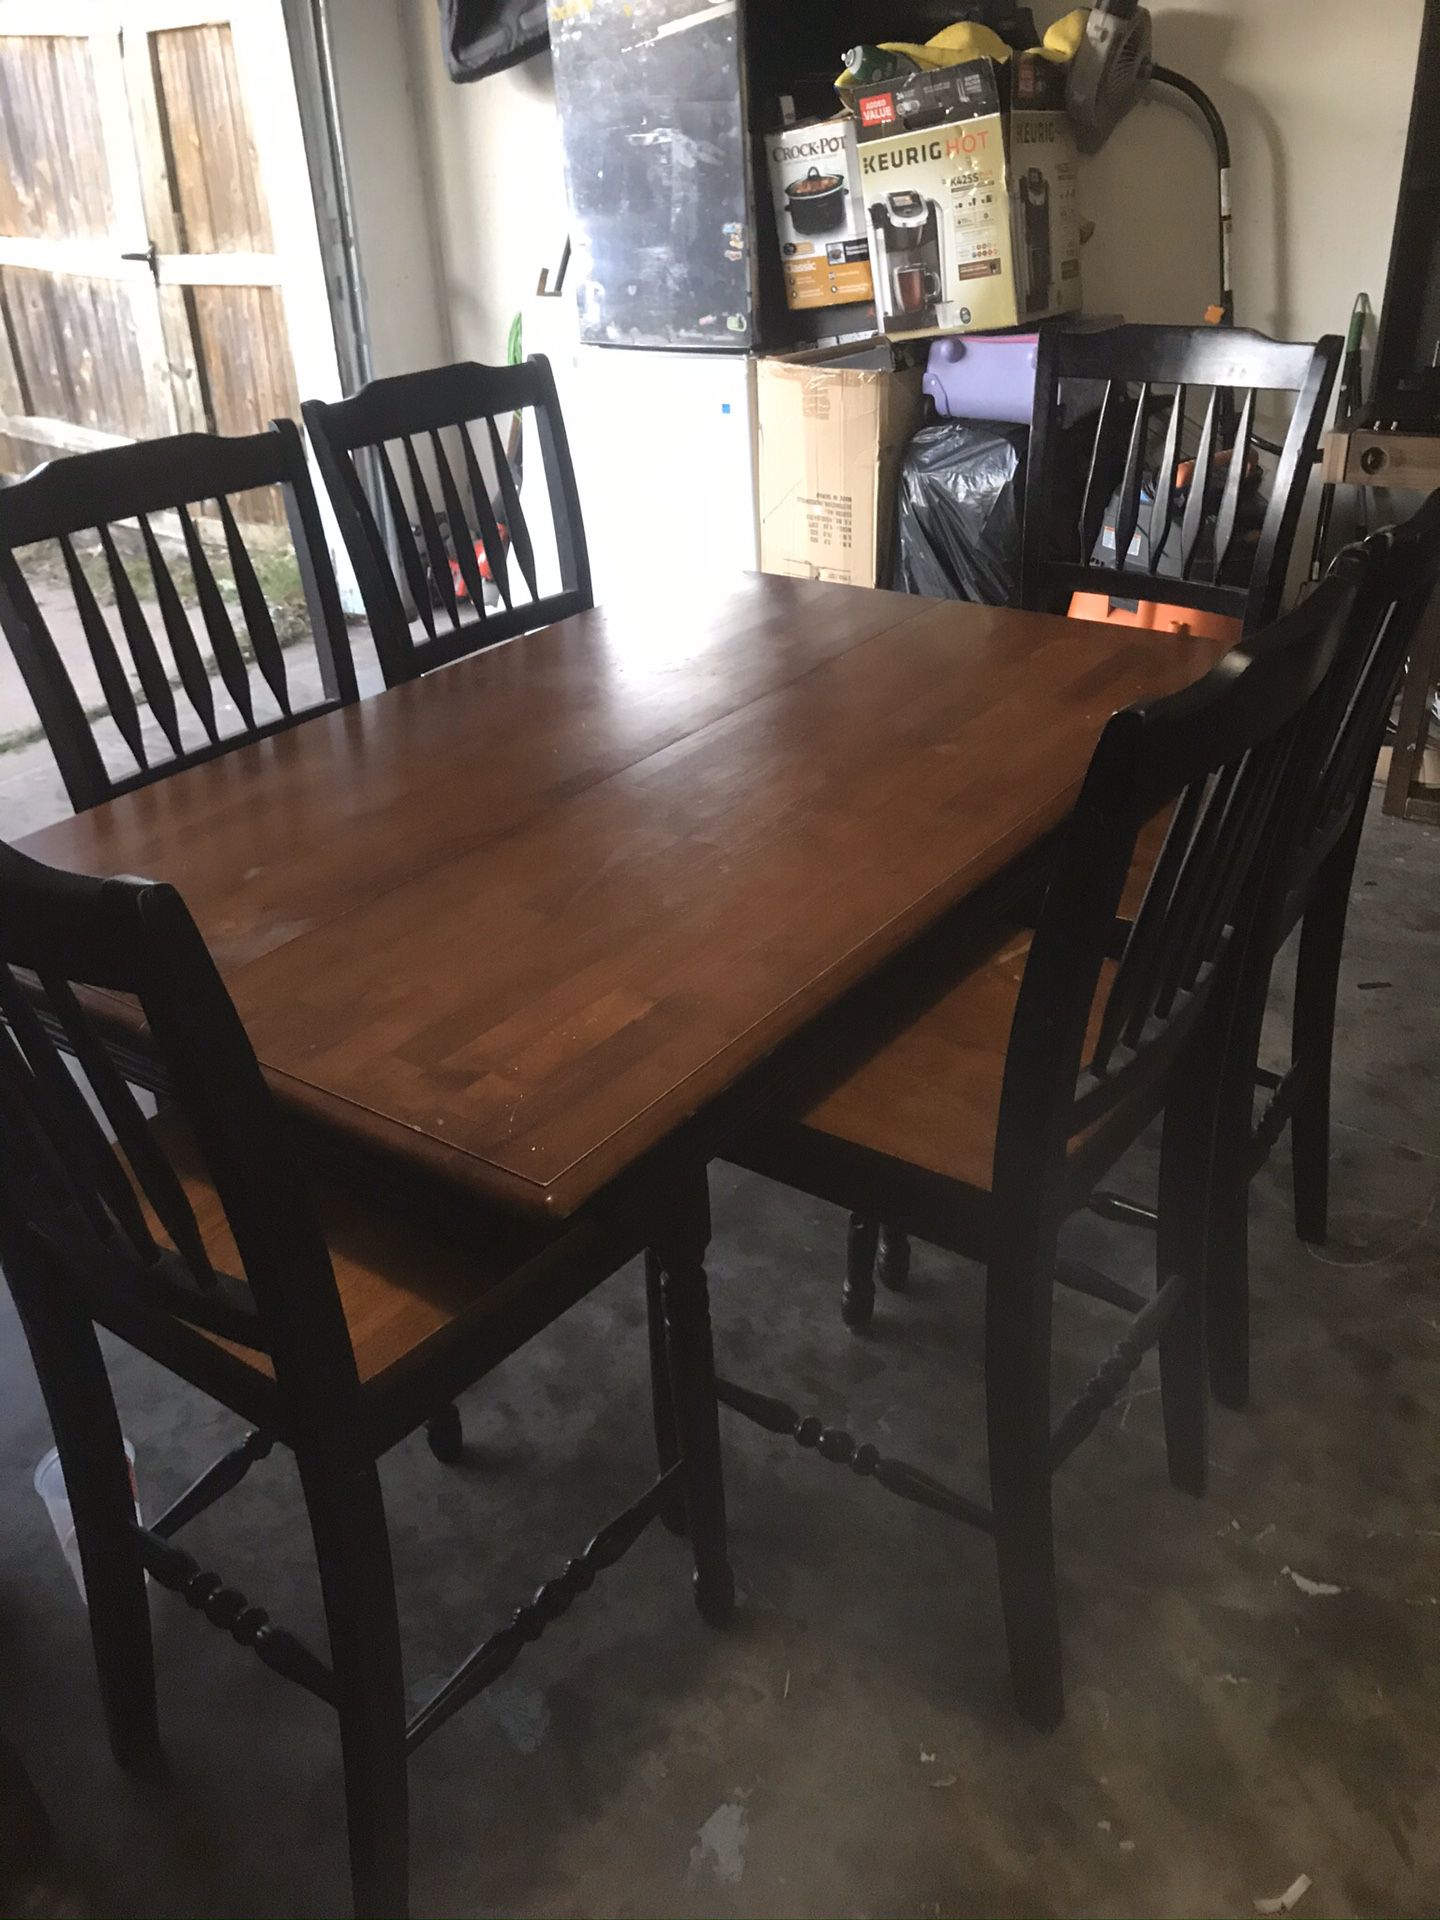 Dining room kitchen table. Dimensions as follow. Chairs 24 inch high the table 30 inches high .56 inch long by 35 inch wide